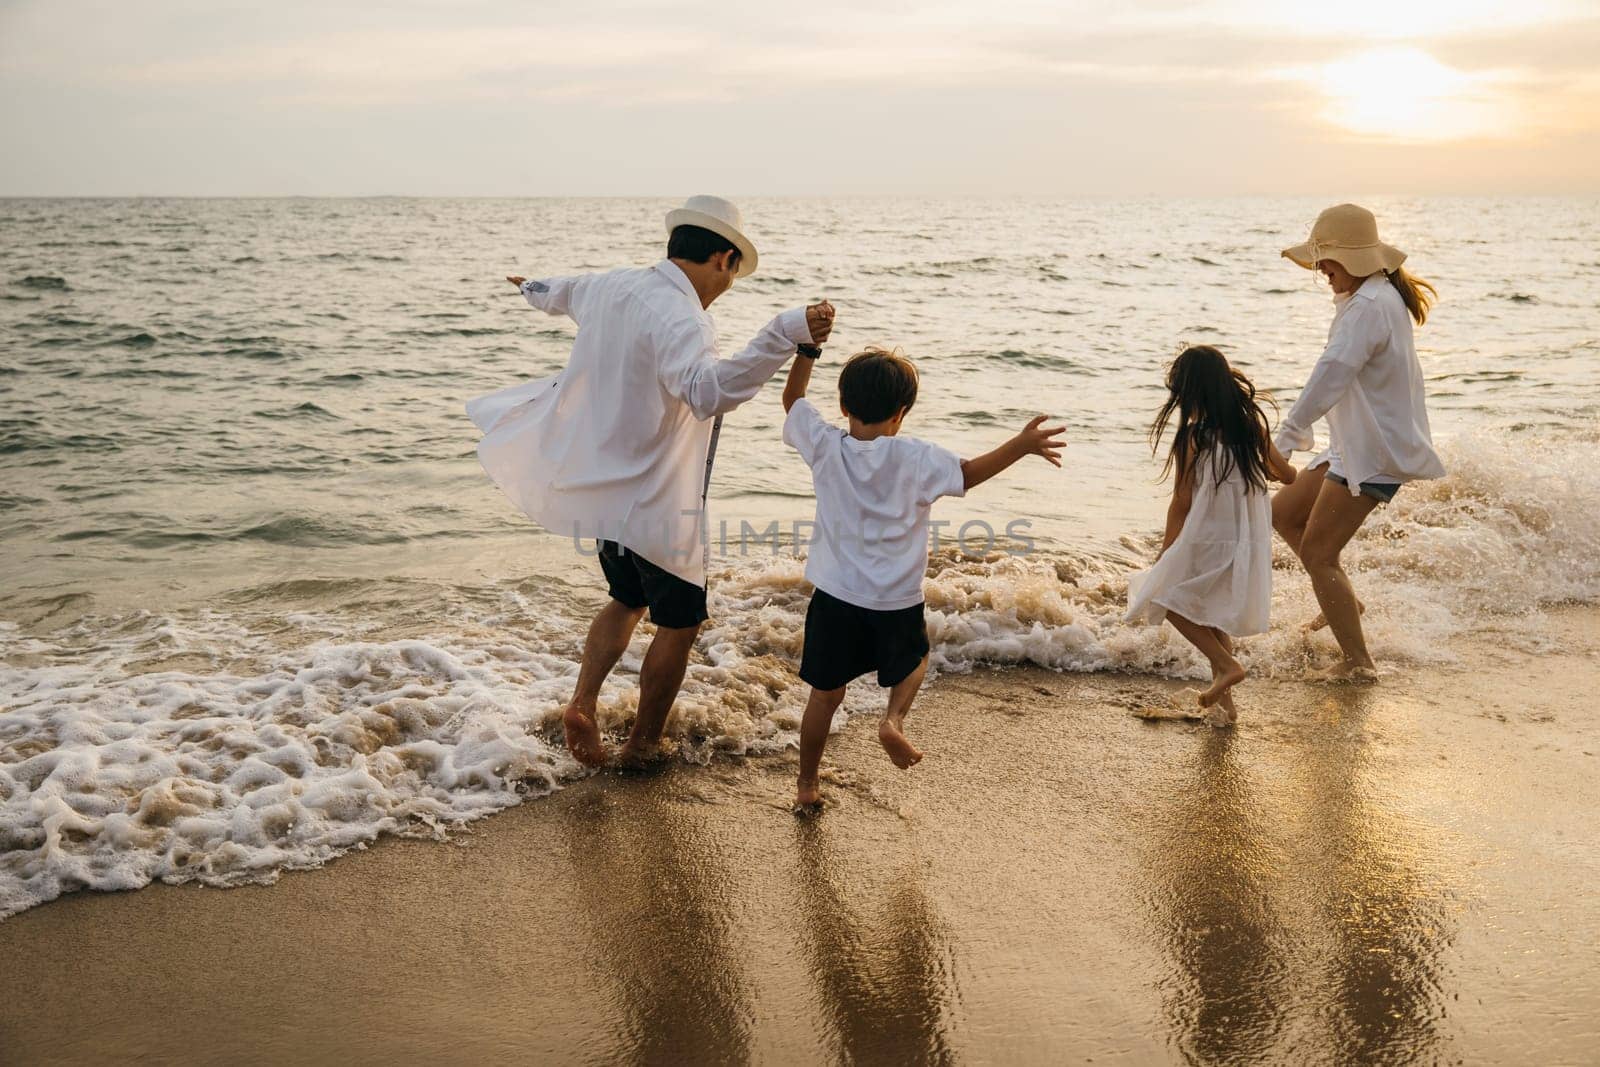 A joyful Asian family back view enjoys quality time on beach. Parents and daughters bond playing and pretending to fly with arms outstretched. carefree and happy weekend moment captured under sun.